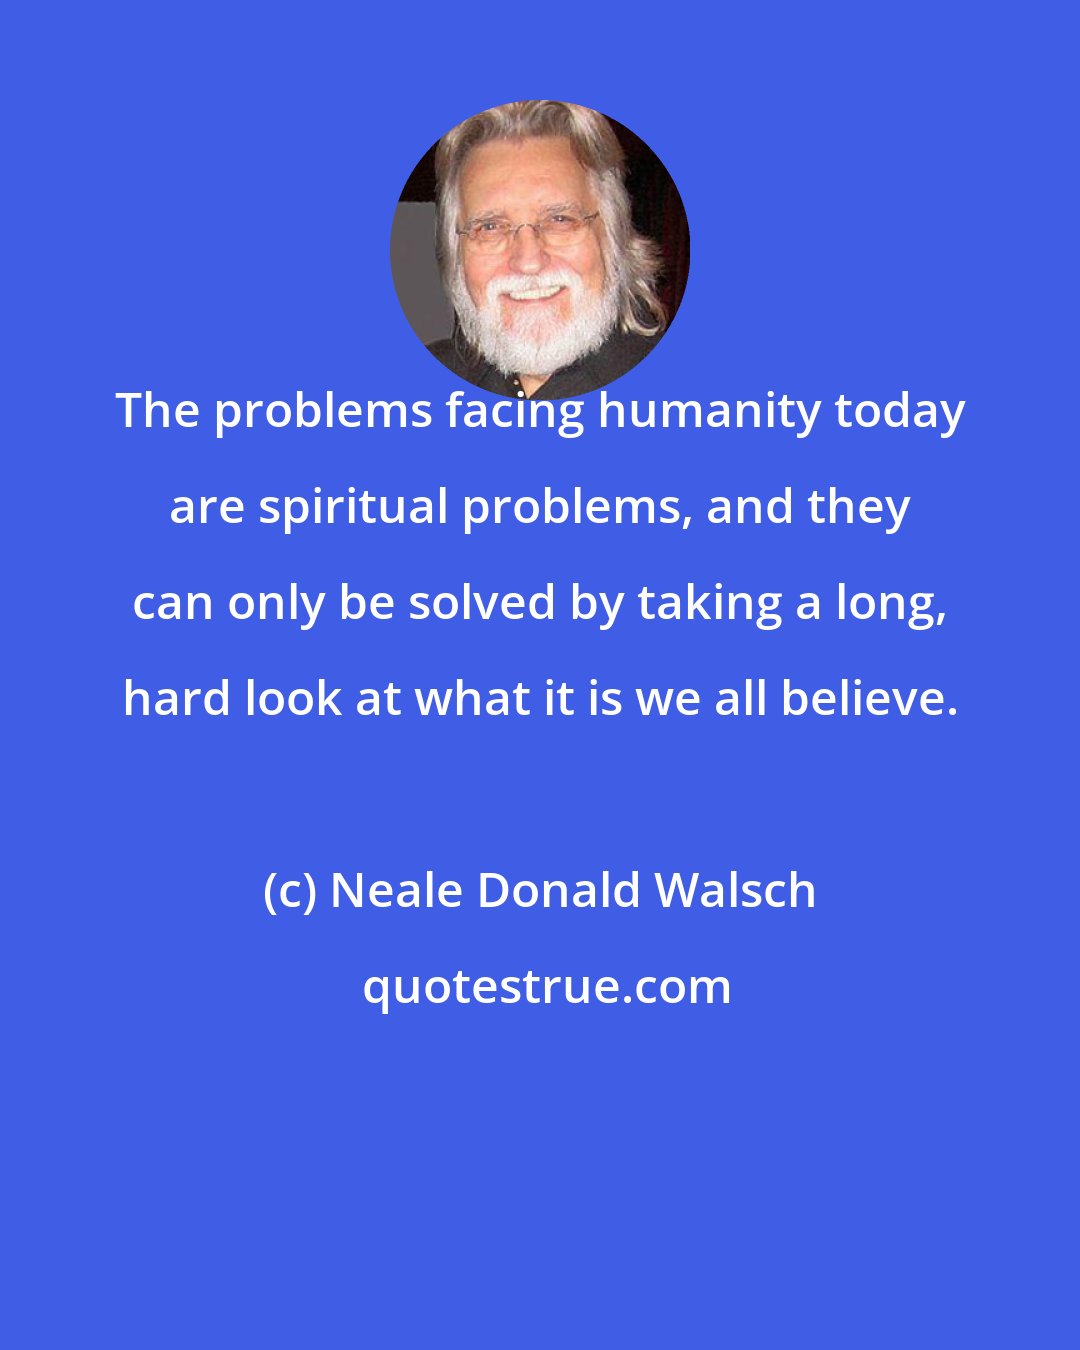 Neale Donald Walsch: The problems facing humanity today are spiritual problems, and they can only be solved by taking a long, hard look at what it is we all believe.